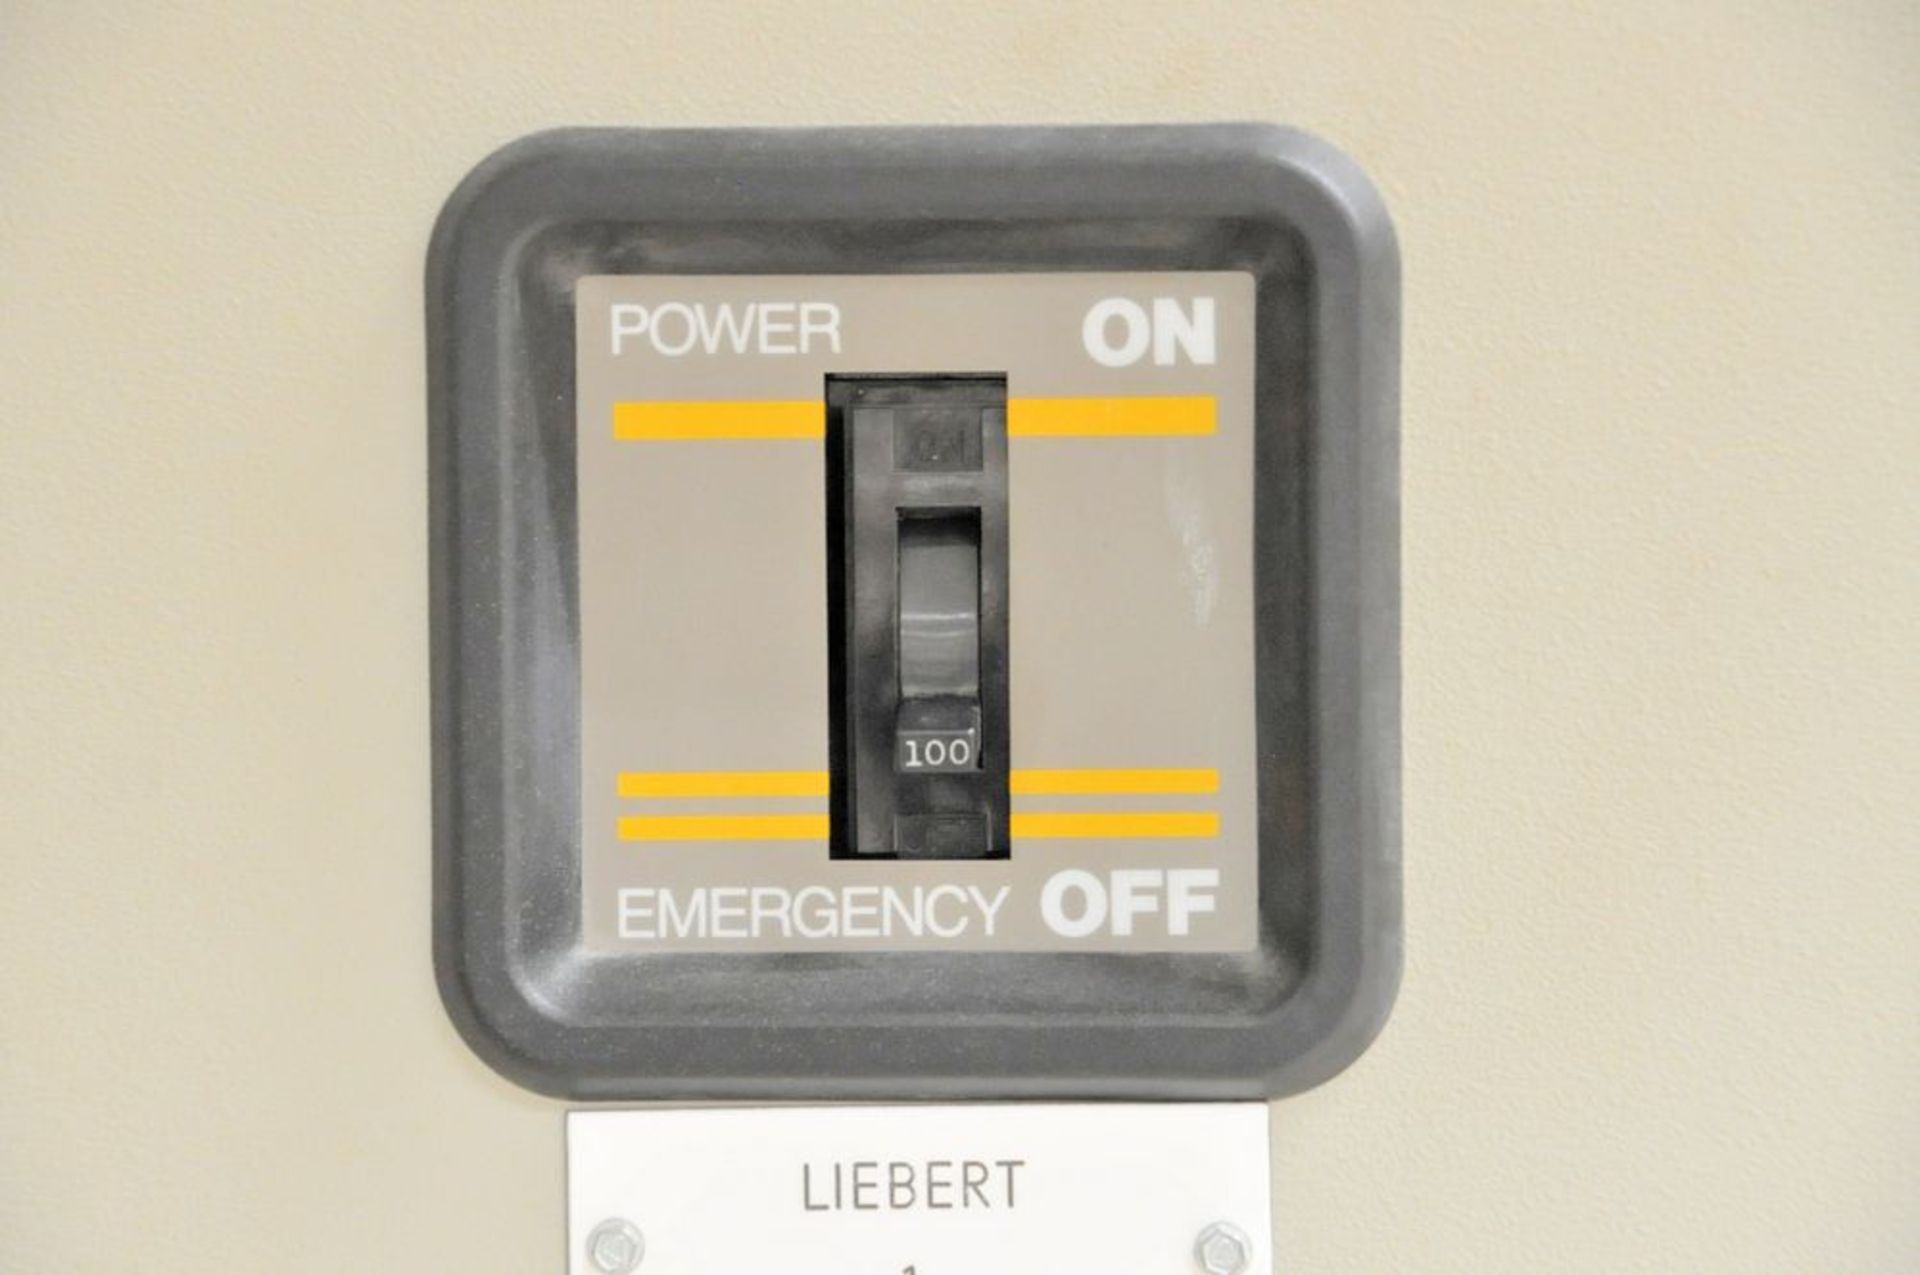 Liebert System 3 Environmental Room Control Unit, (Network Control Center Room), (1st Floor) - Image 3 of 3